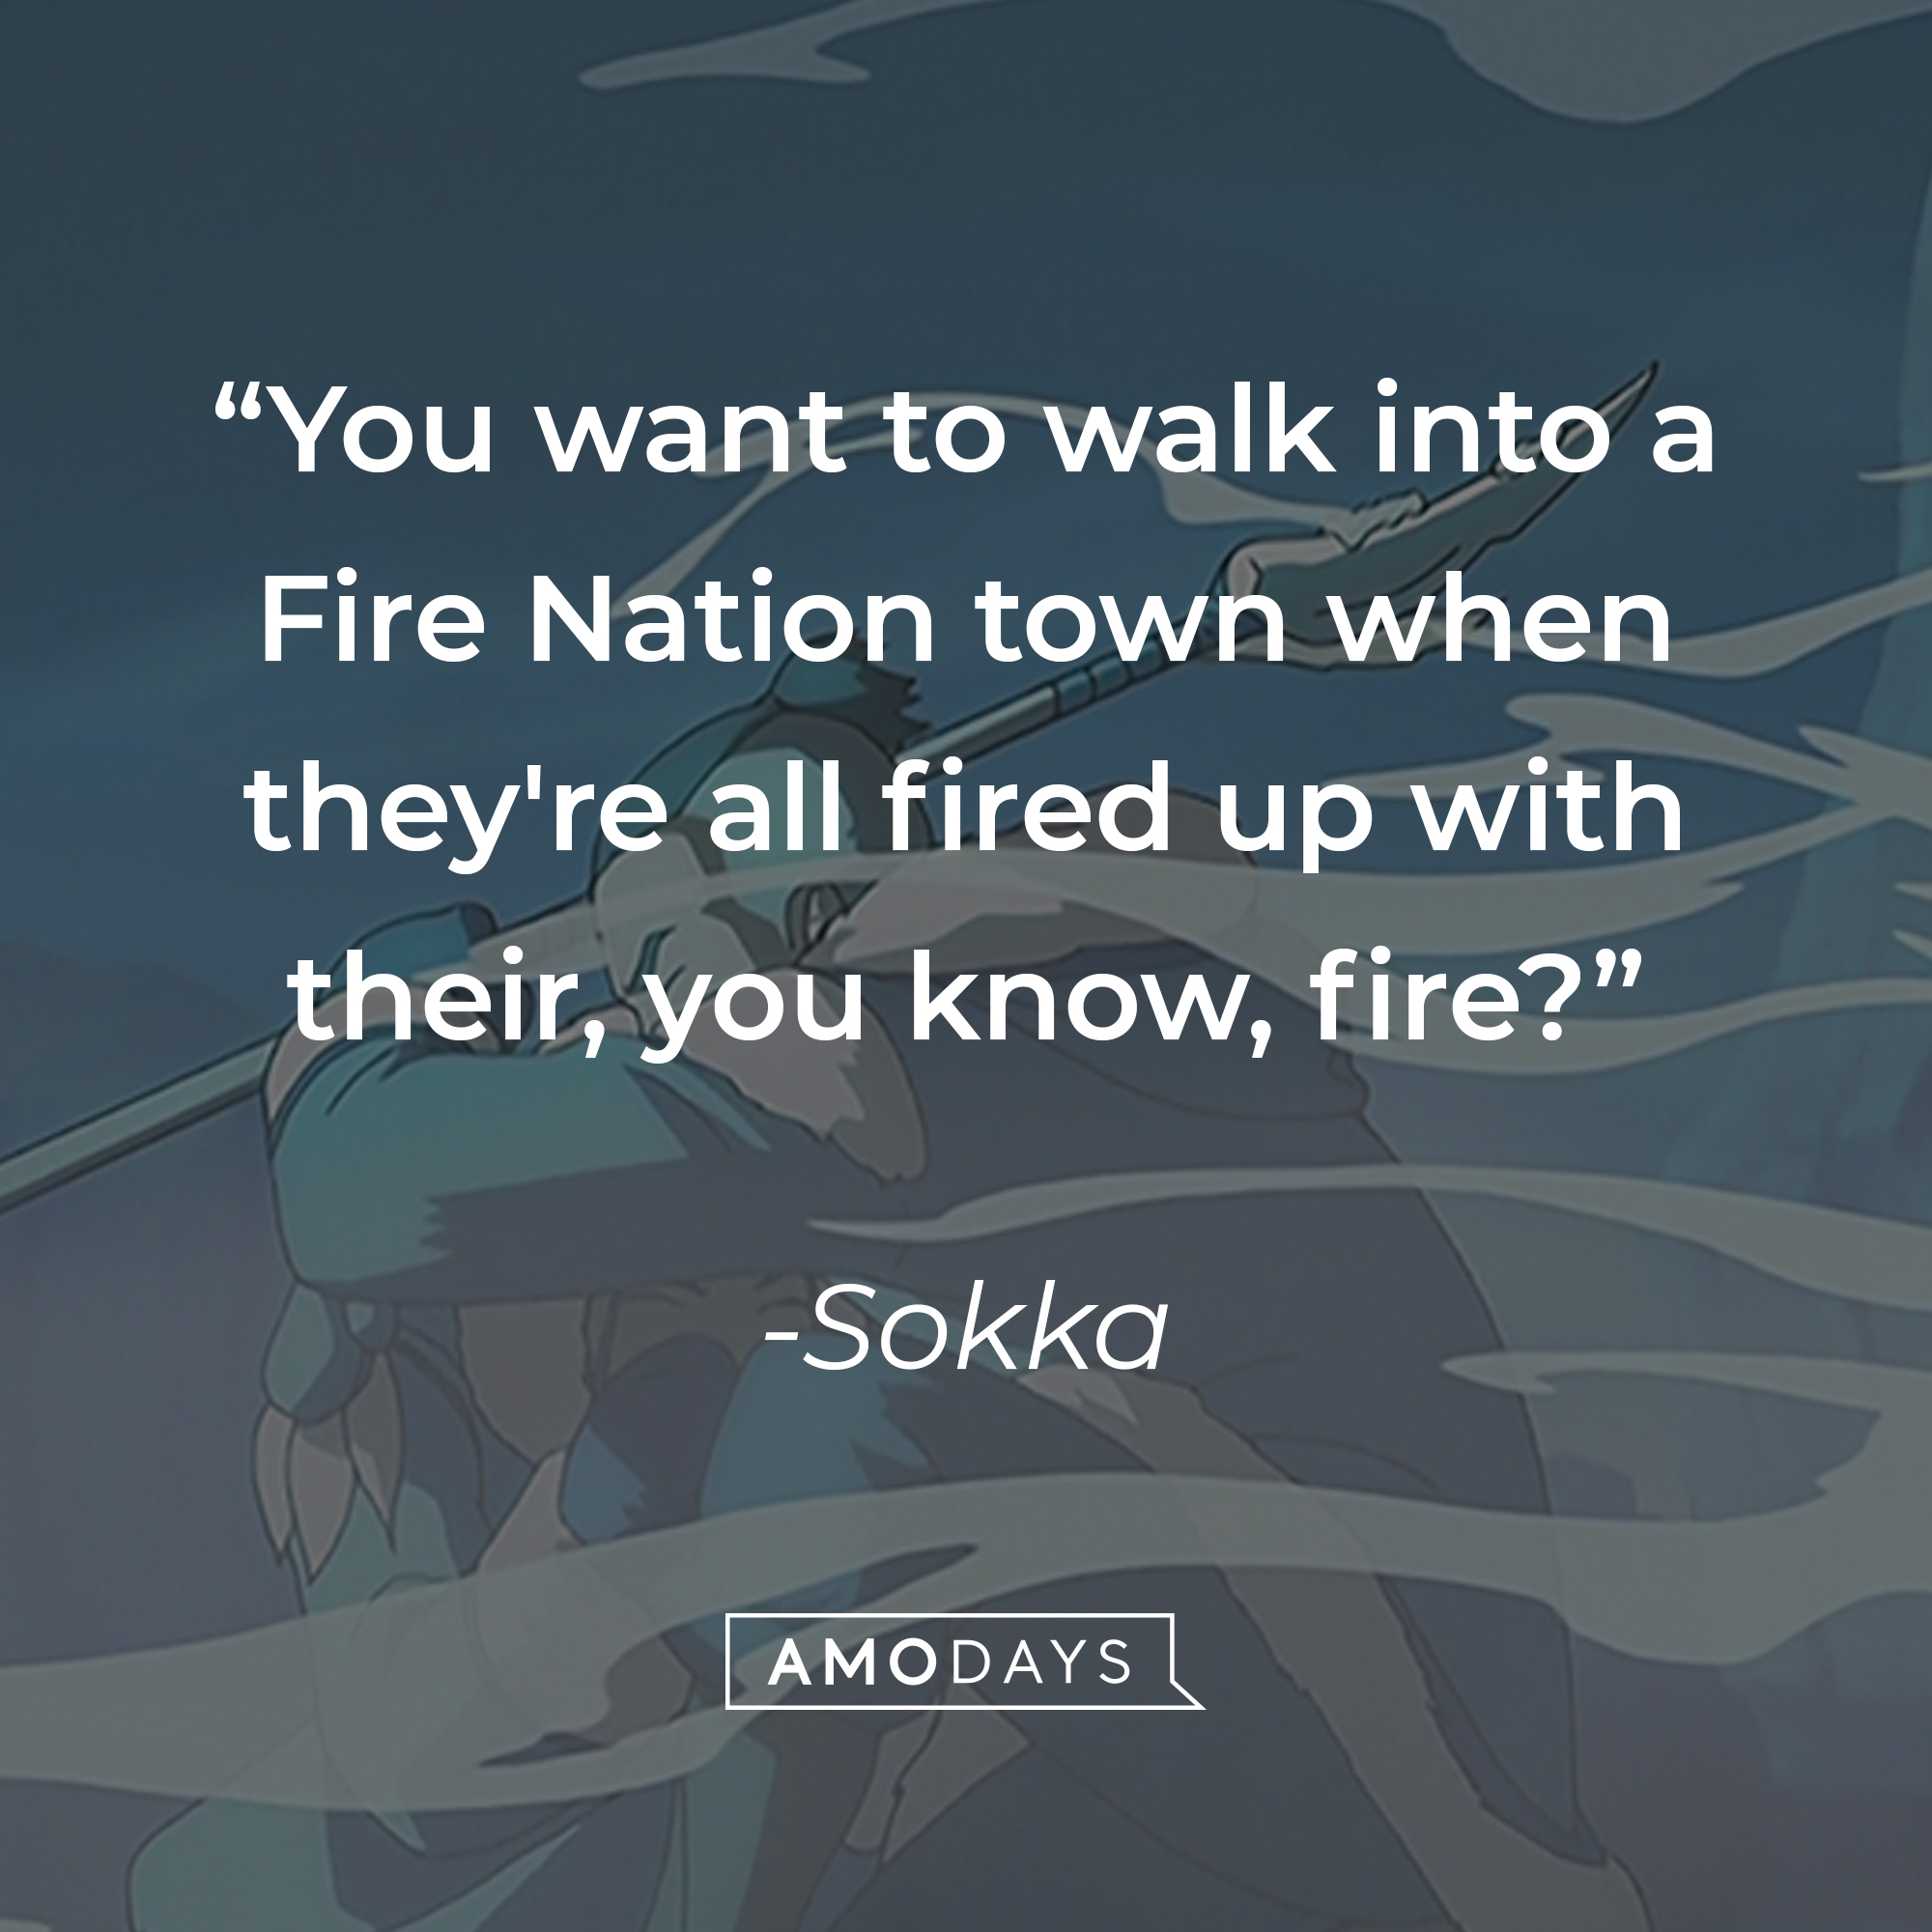 Sokka's quote: "You want to walk into a Fire Nation town when they're all fired up with their, you know, fire?" | Source: facebook.com/avatarthelastairbender